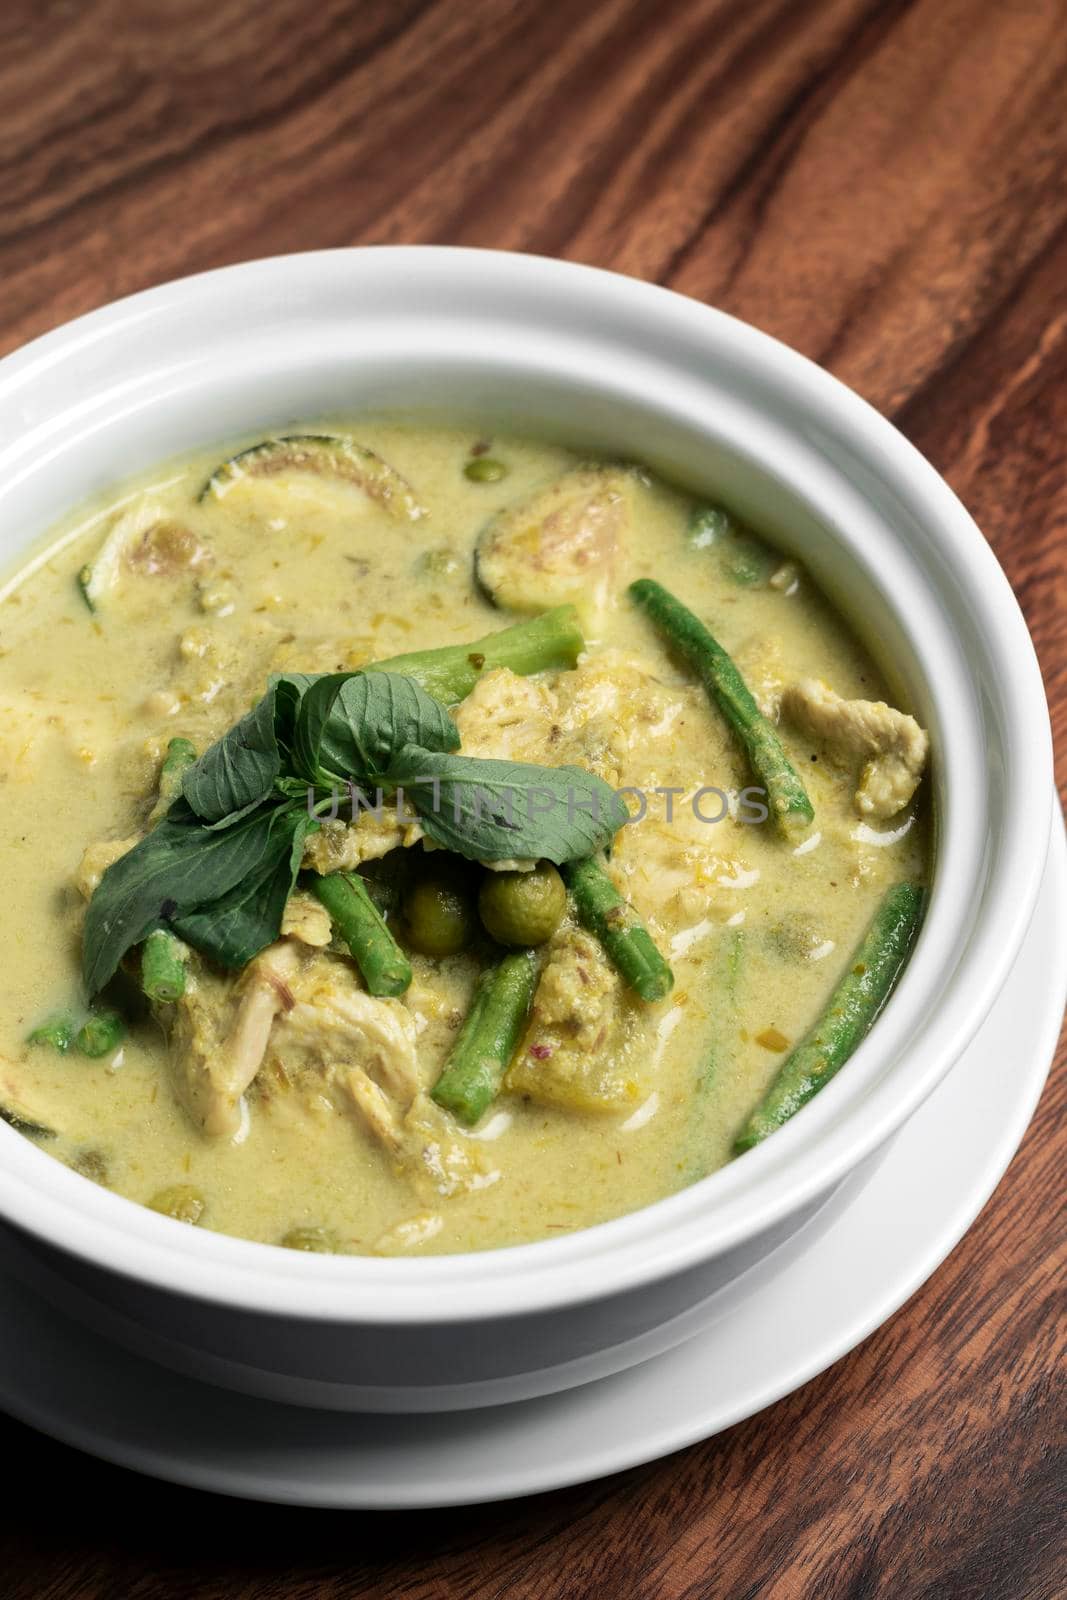 thai green curry with chicken and vegetables on wood table